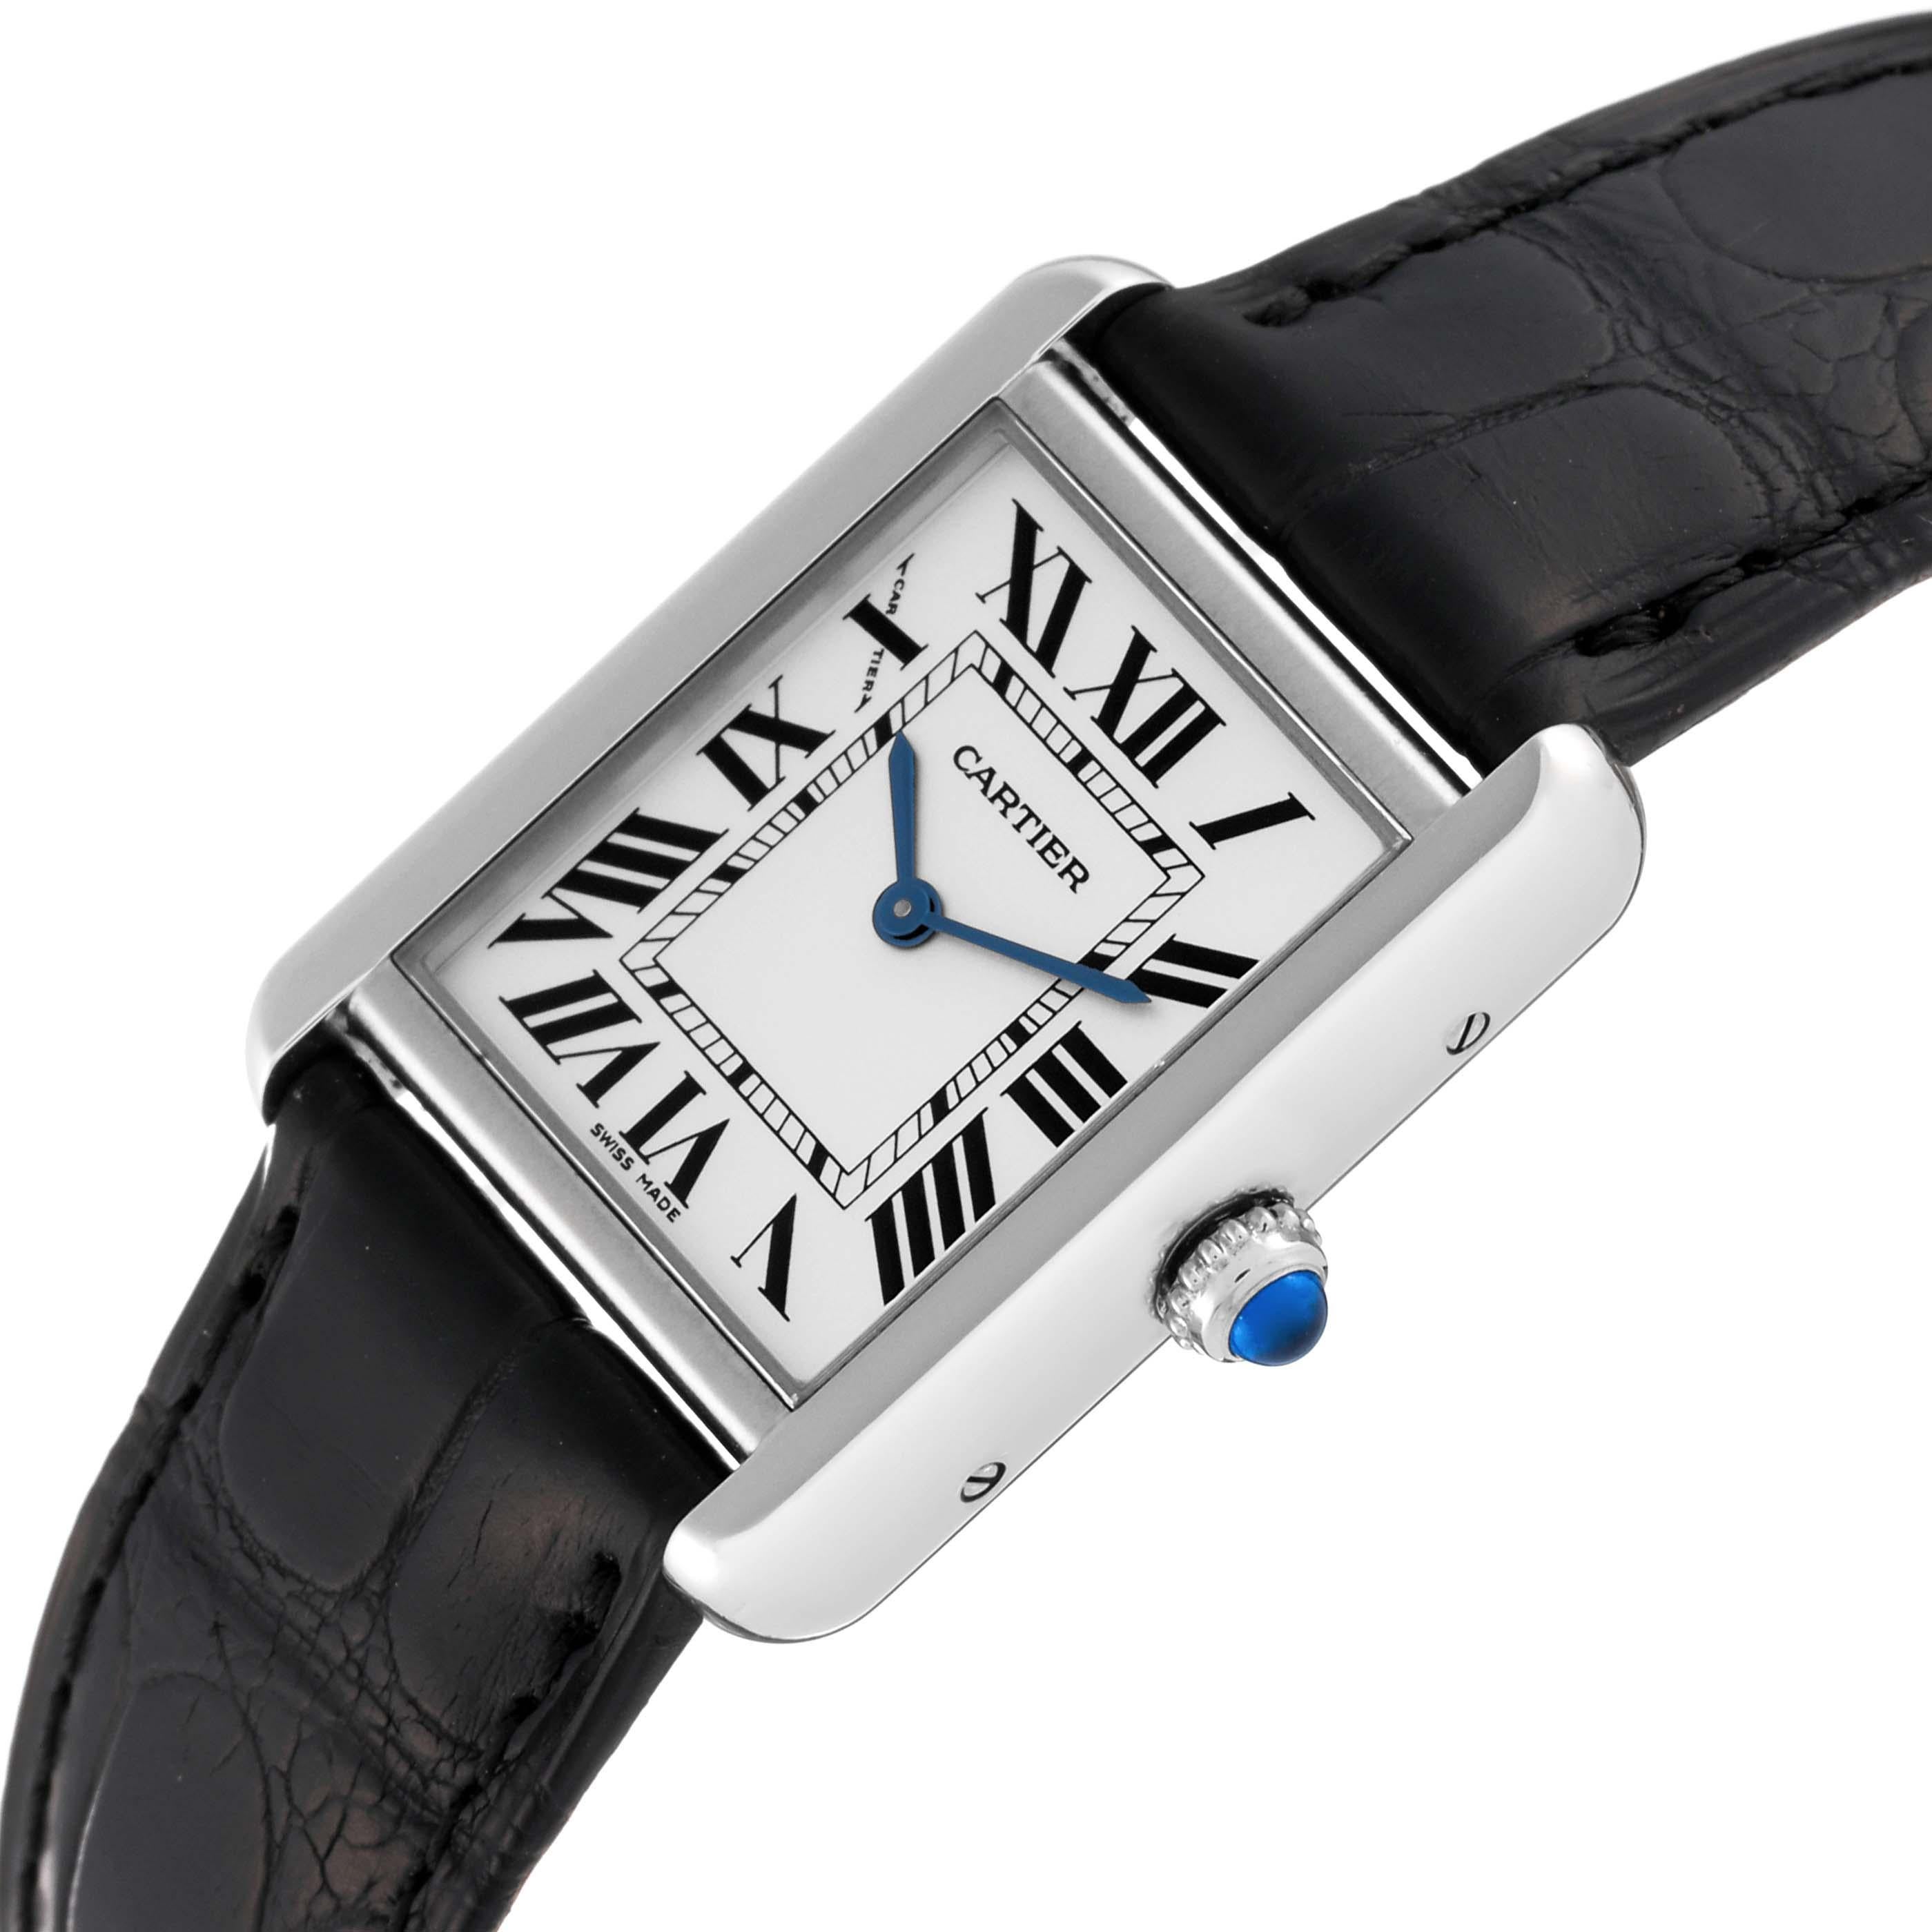 Cartier Tank Solo Steel Black Strap Ladies Watch W5200005. Quartz movement. Stainless steel case 31.0 x 24.0 mm. Circular grained crown set with the blue spinel cabochon. . Scratch resistant sapphire crystal. Silver opaline dial with black Roman